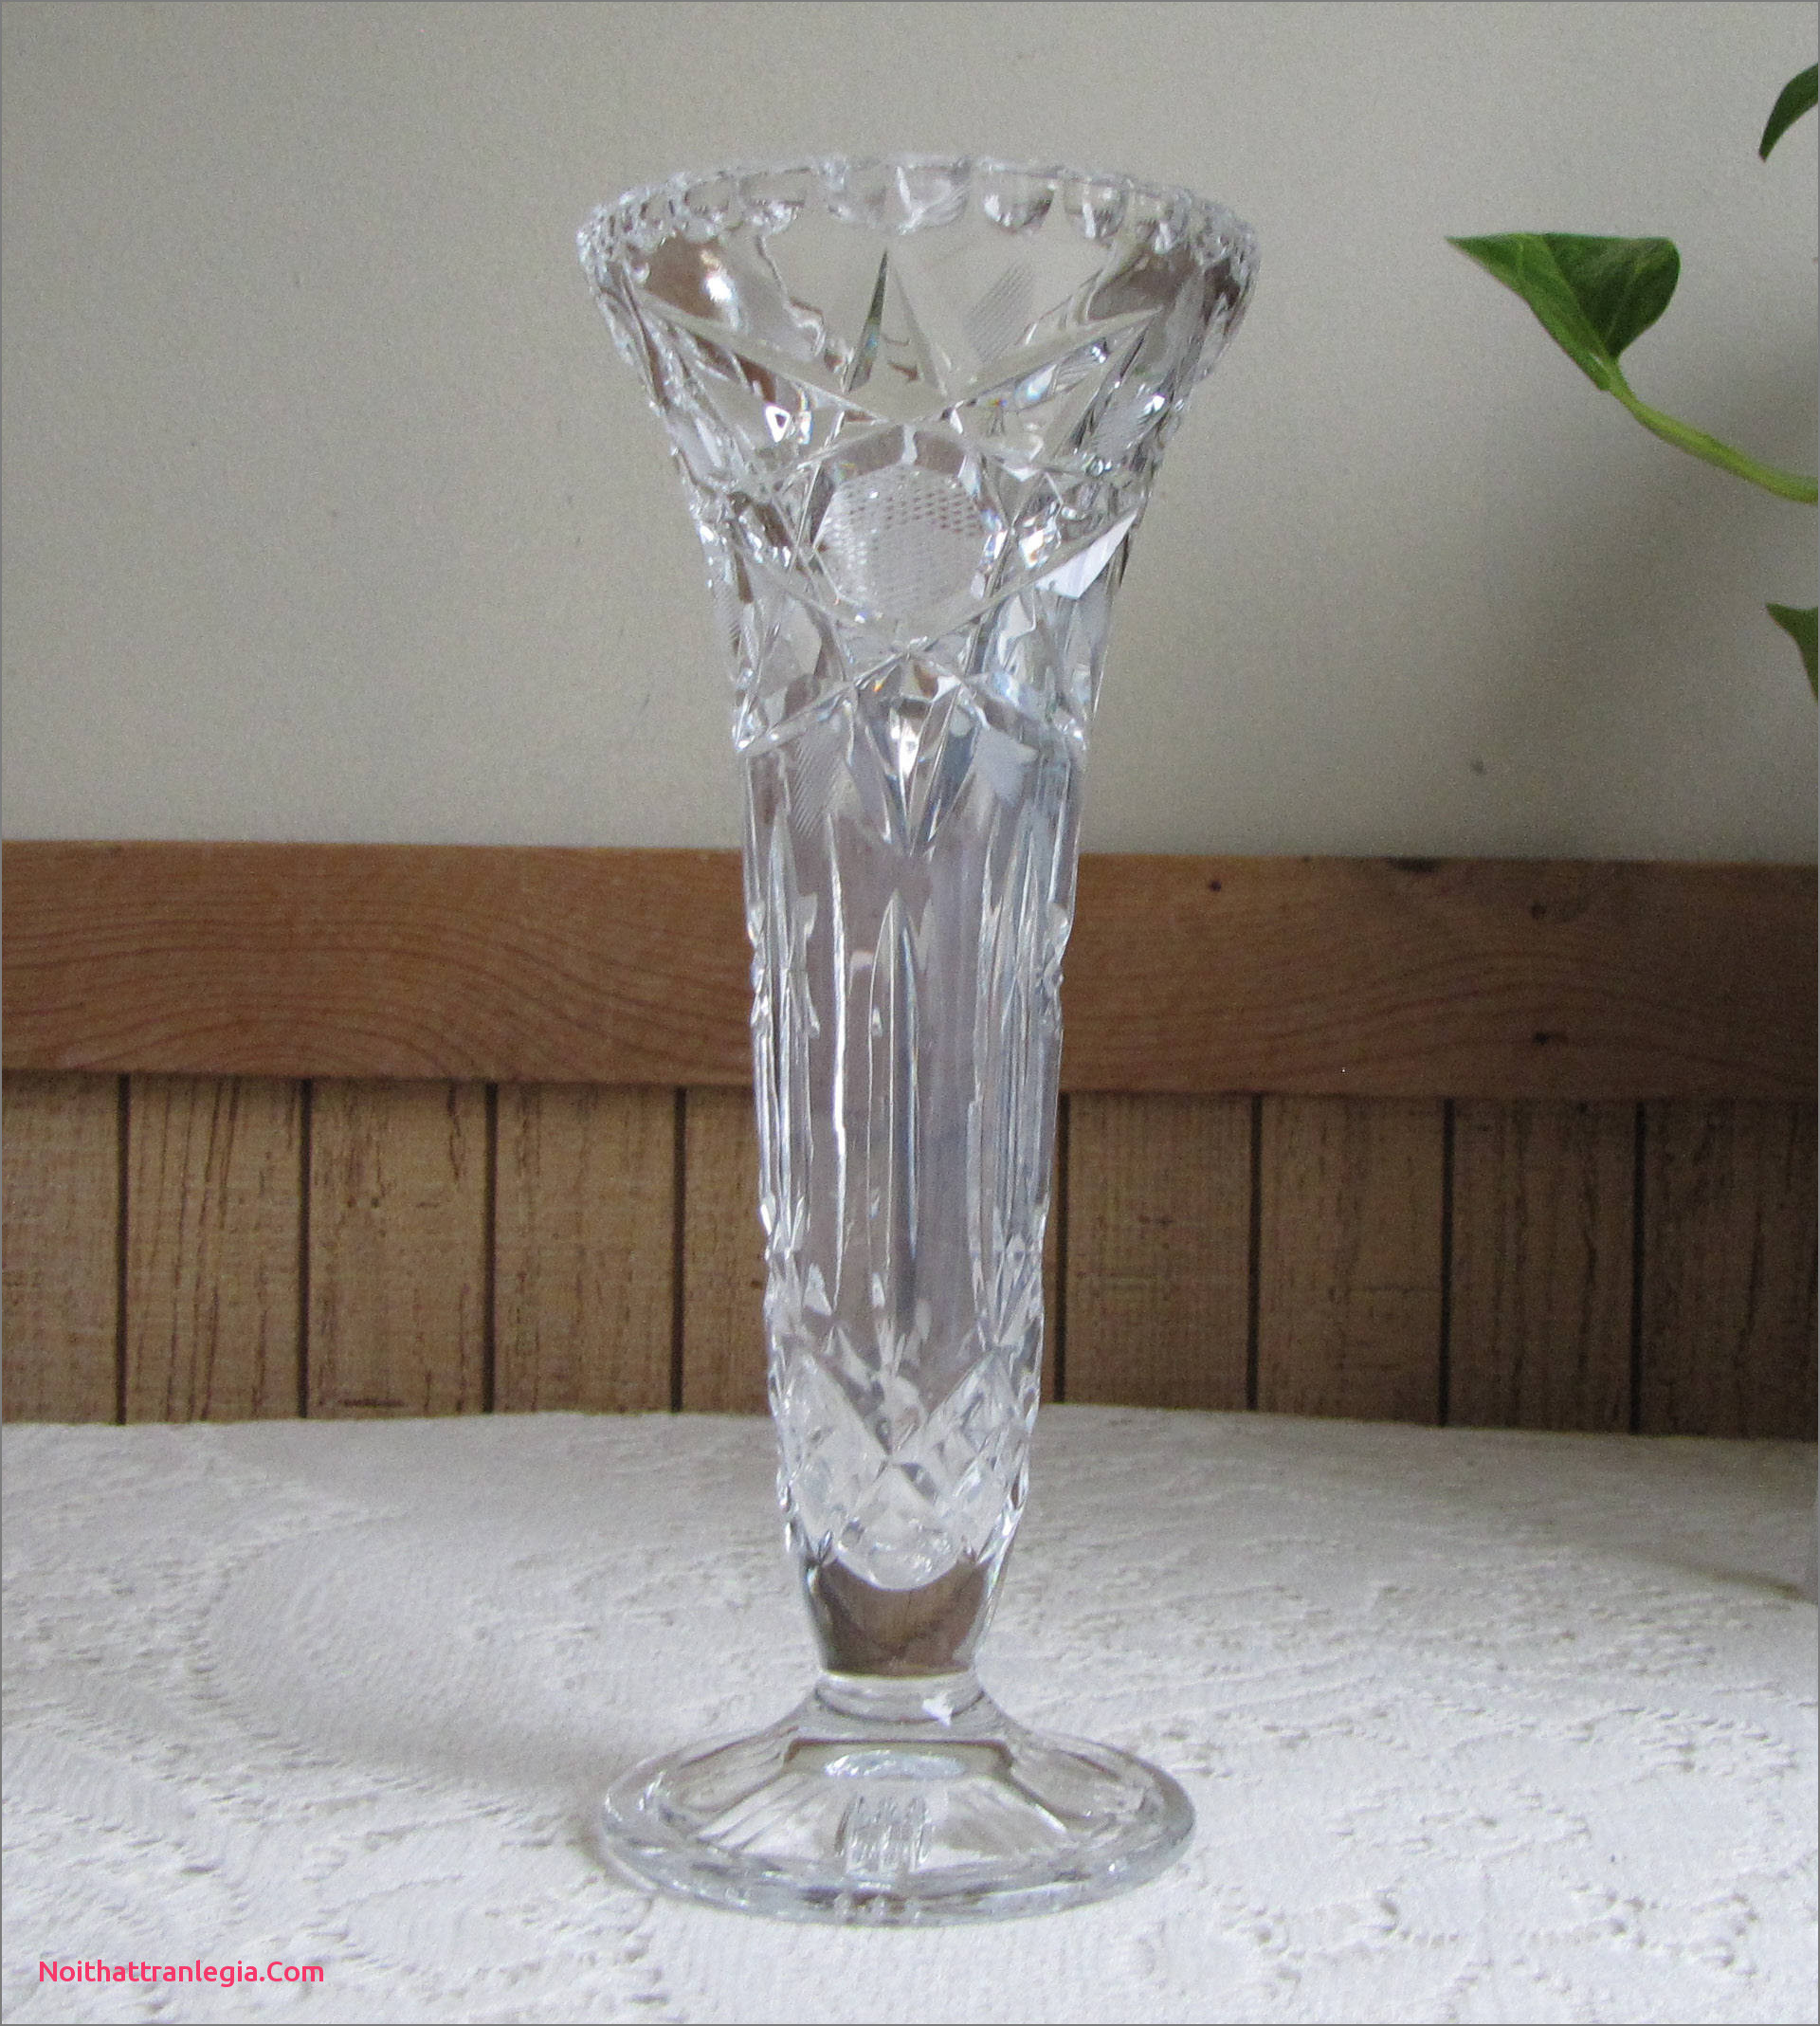 16 Perfect Footed Glass Vase 2022 free download footed glass vase of 20 cut glass antique vase noithattranlegia vases design with crystal vase cut glass flower vase etched waffle and stars footed vintage vases and florist ware